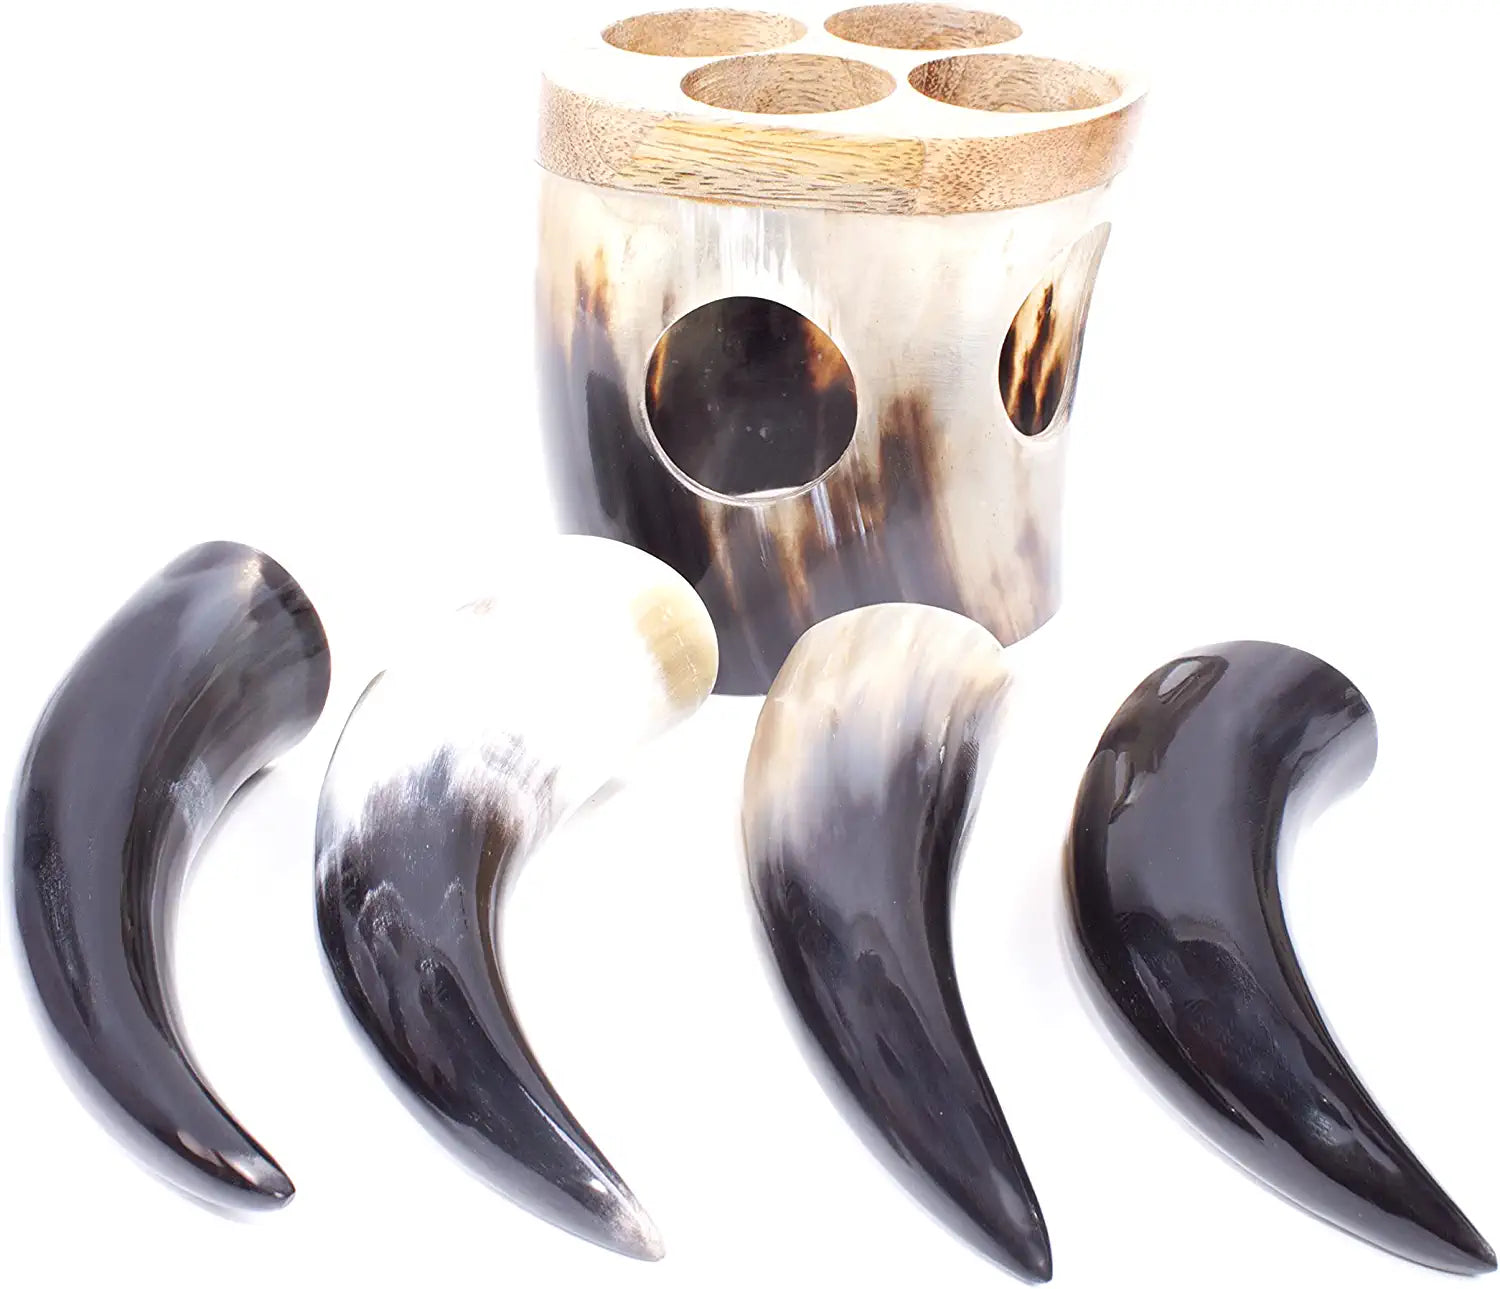 Laniti Viking Drinking Horn Shotglass Medieval Style Genuine Ox Horn - 4 Set Horn Shots with Stand